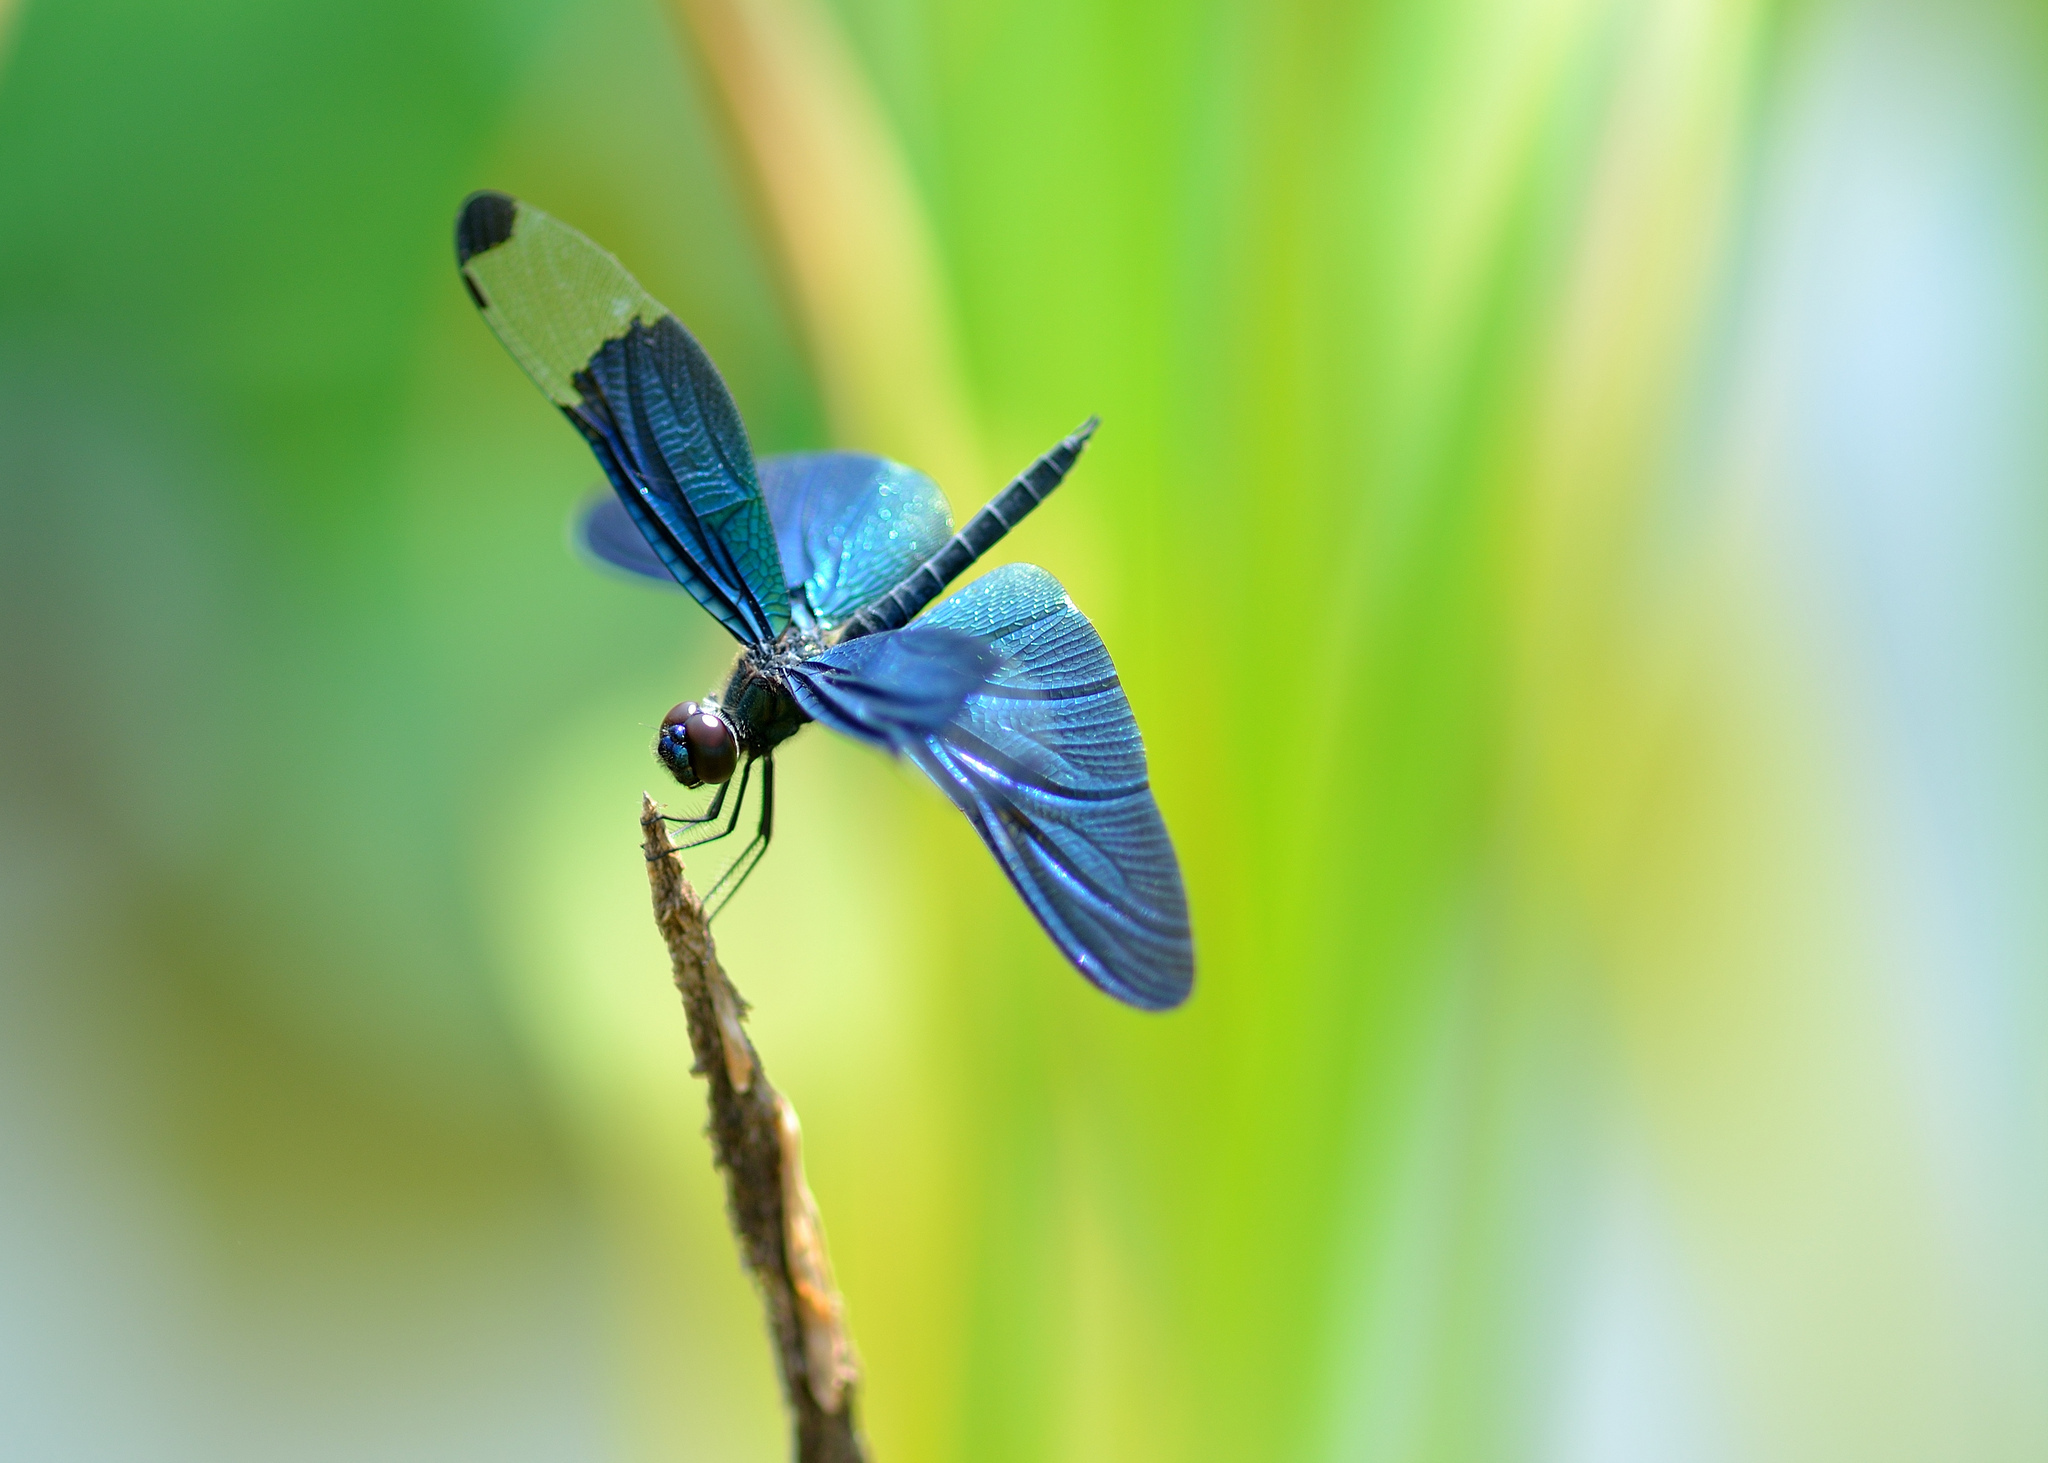 New Lock Screen Wallpapers dragonfly, animal, insects